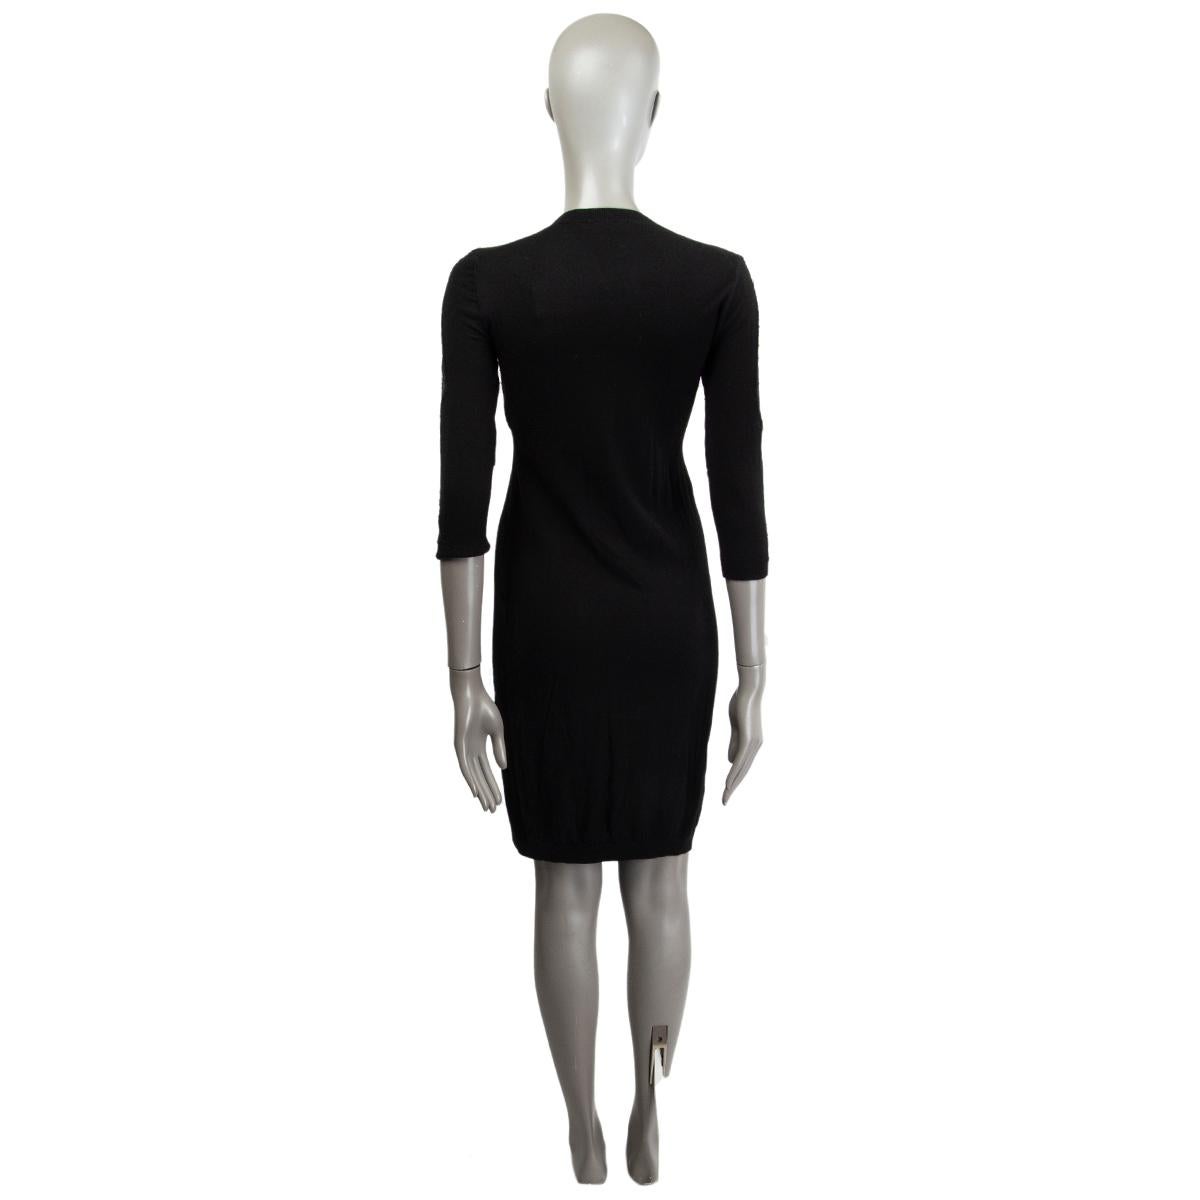 NINA RICCI black wool cashmere LACE PANELED KNIT Dress S In Fair Condition For Sale In Zürich, CH